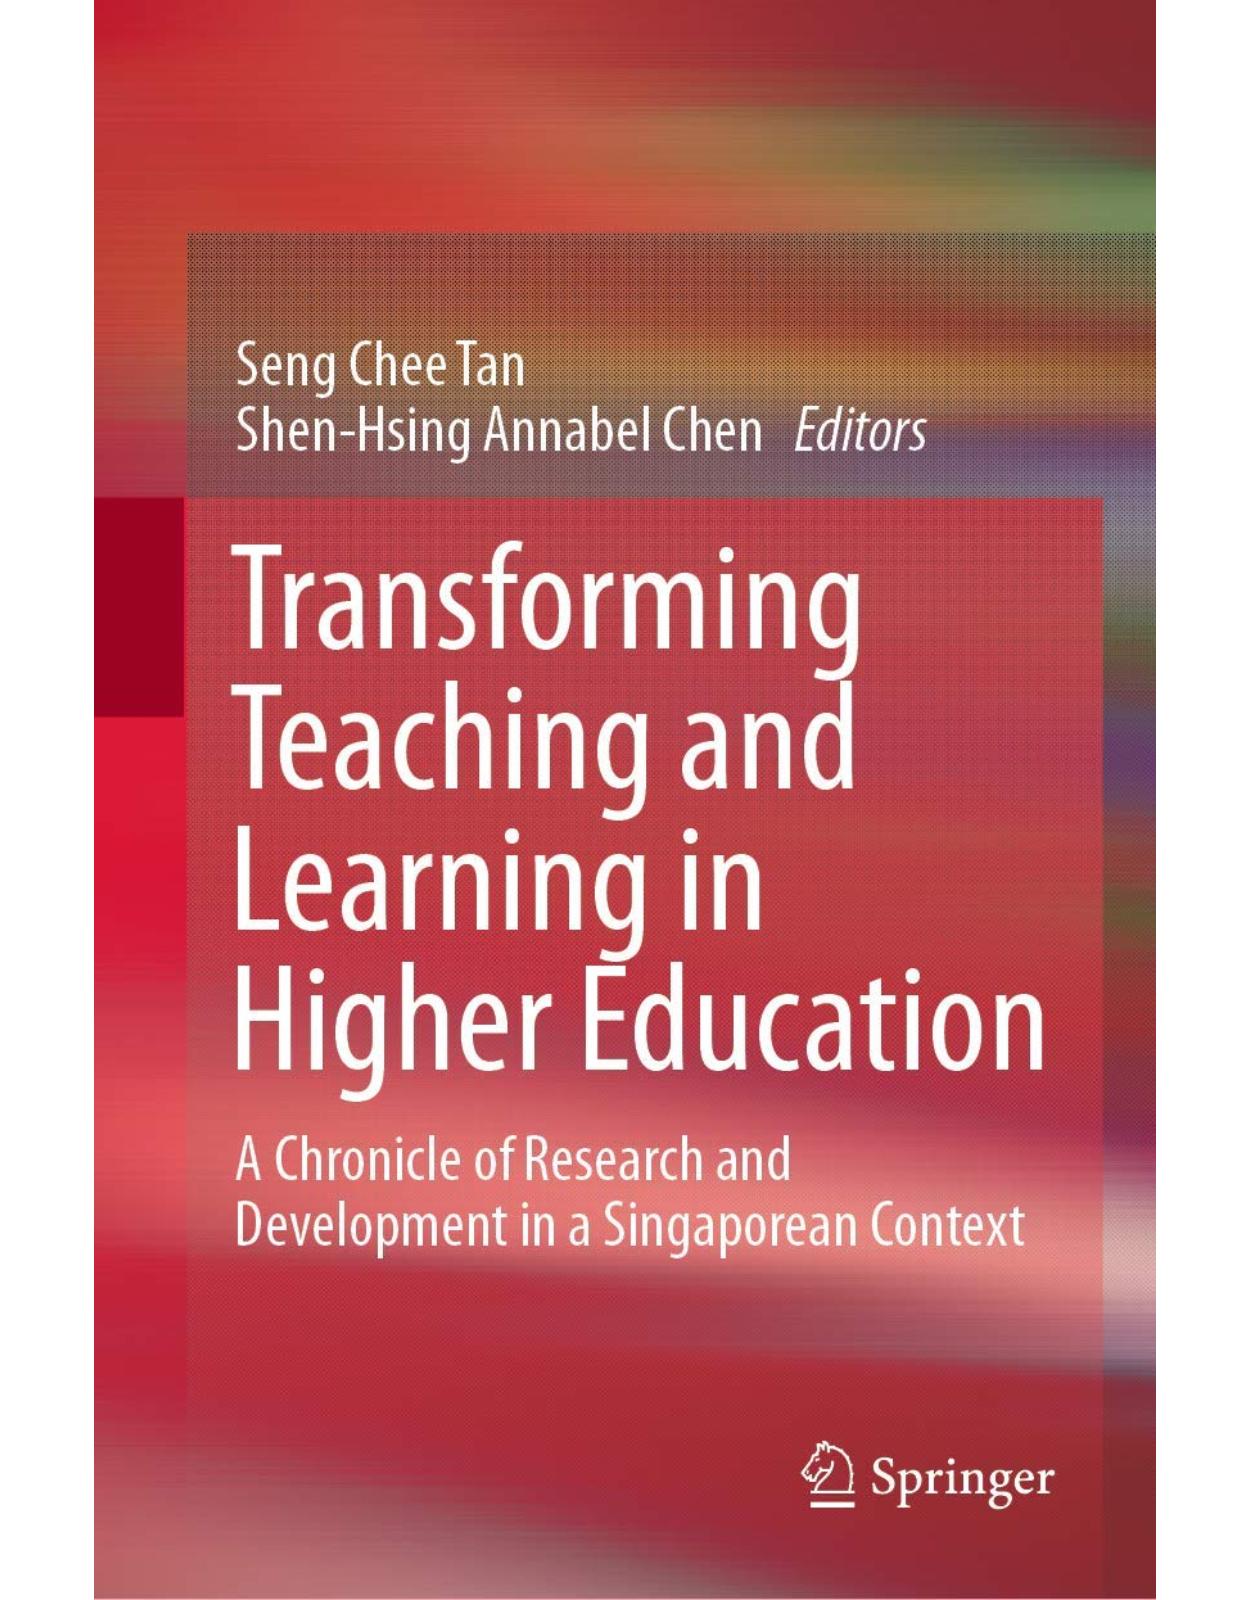 Transforming Teaching and Learning in Higher Education: A Chronicle of Research and Development in a Singaporean Context